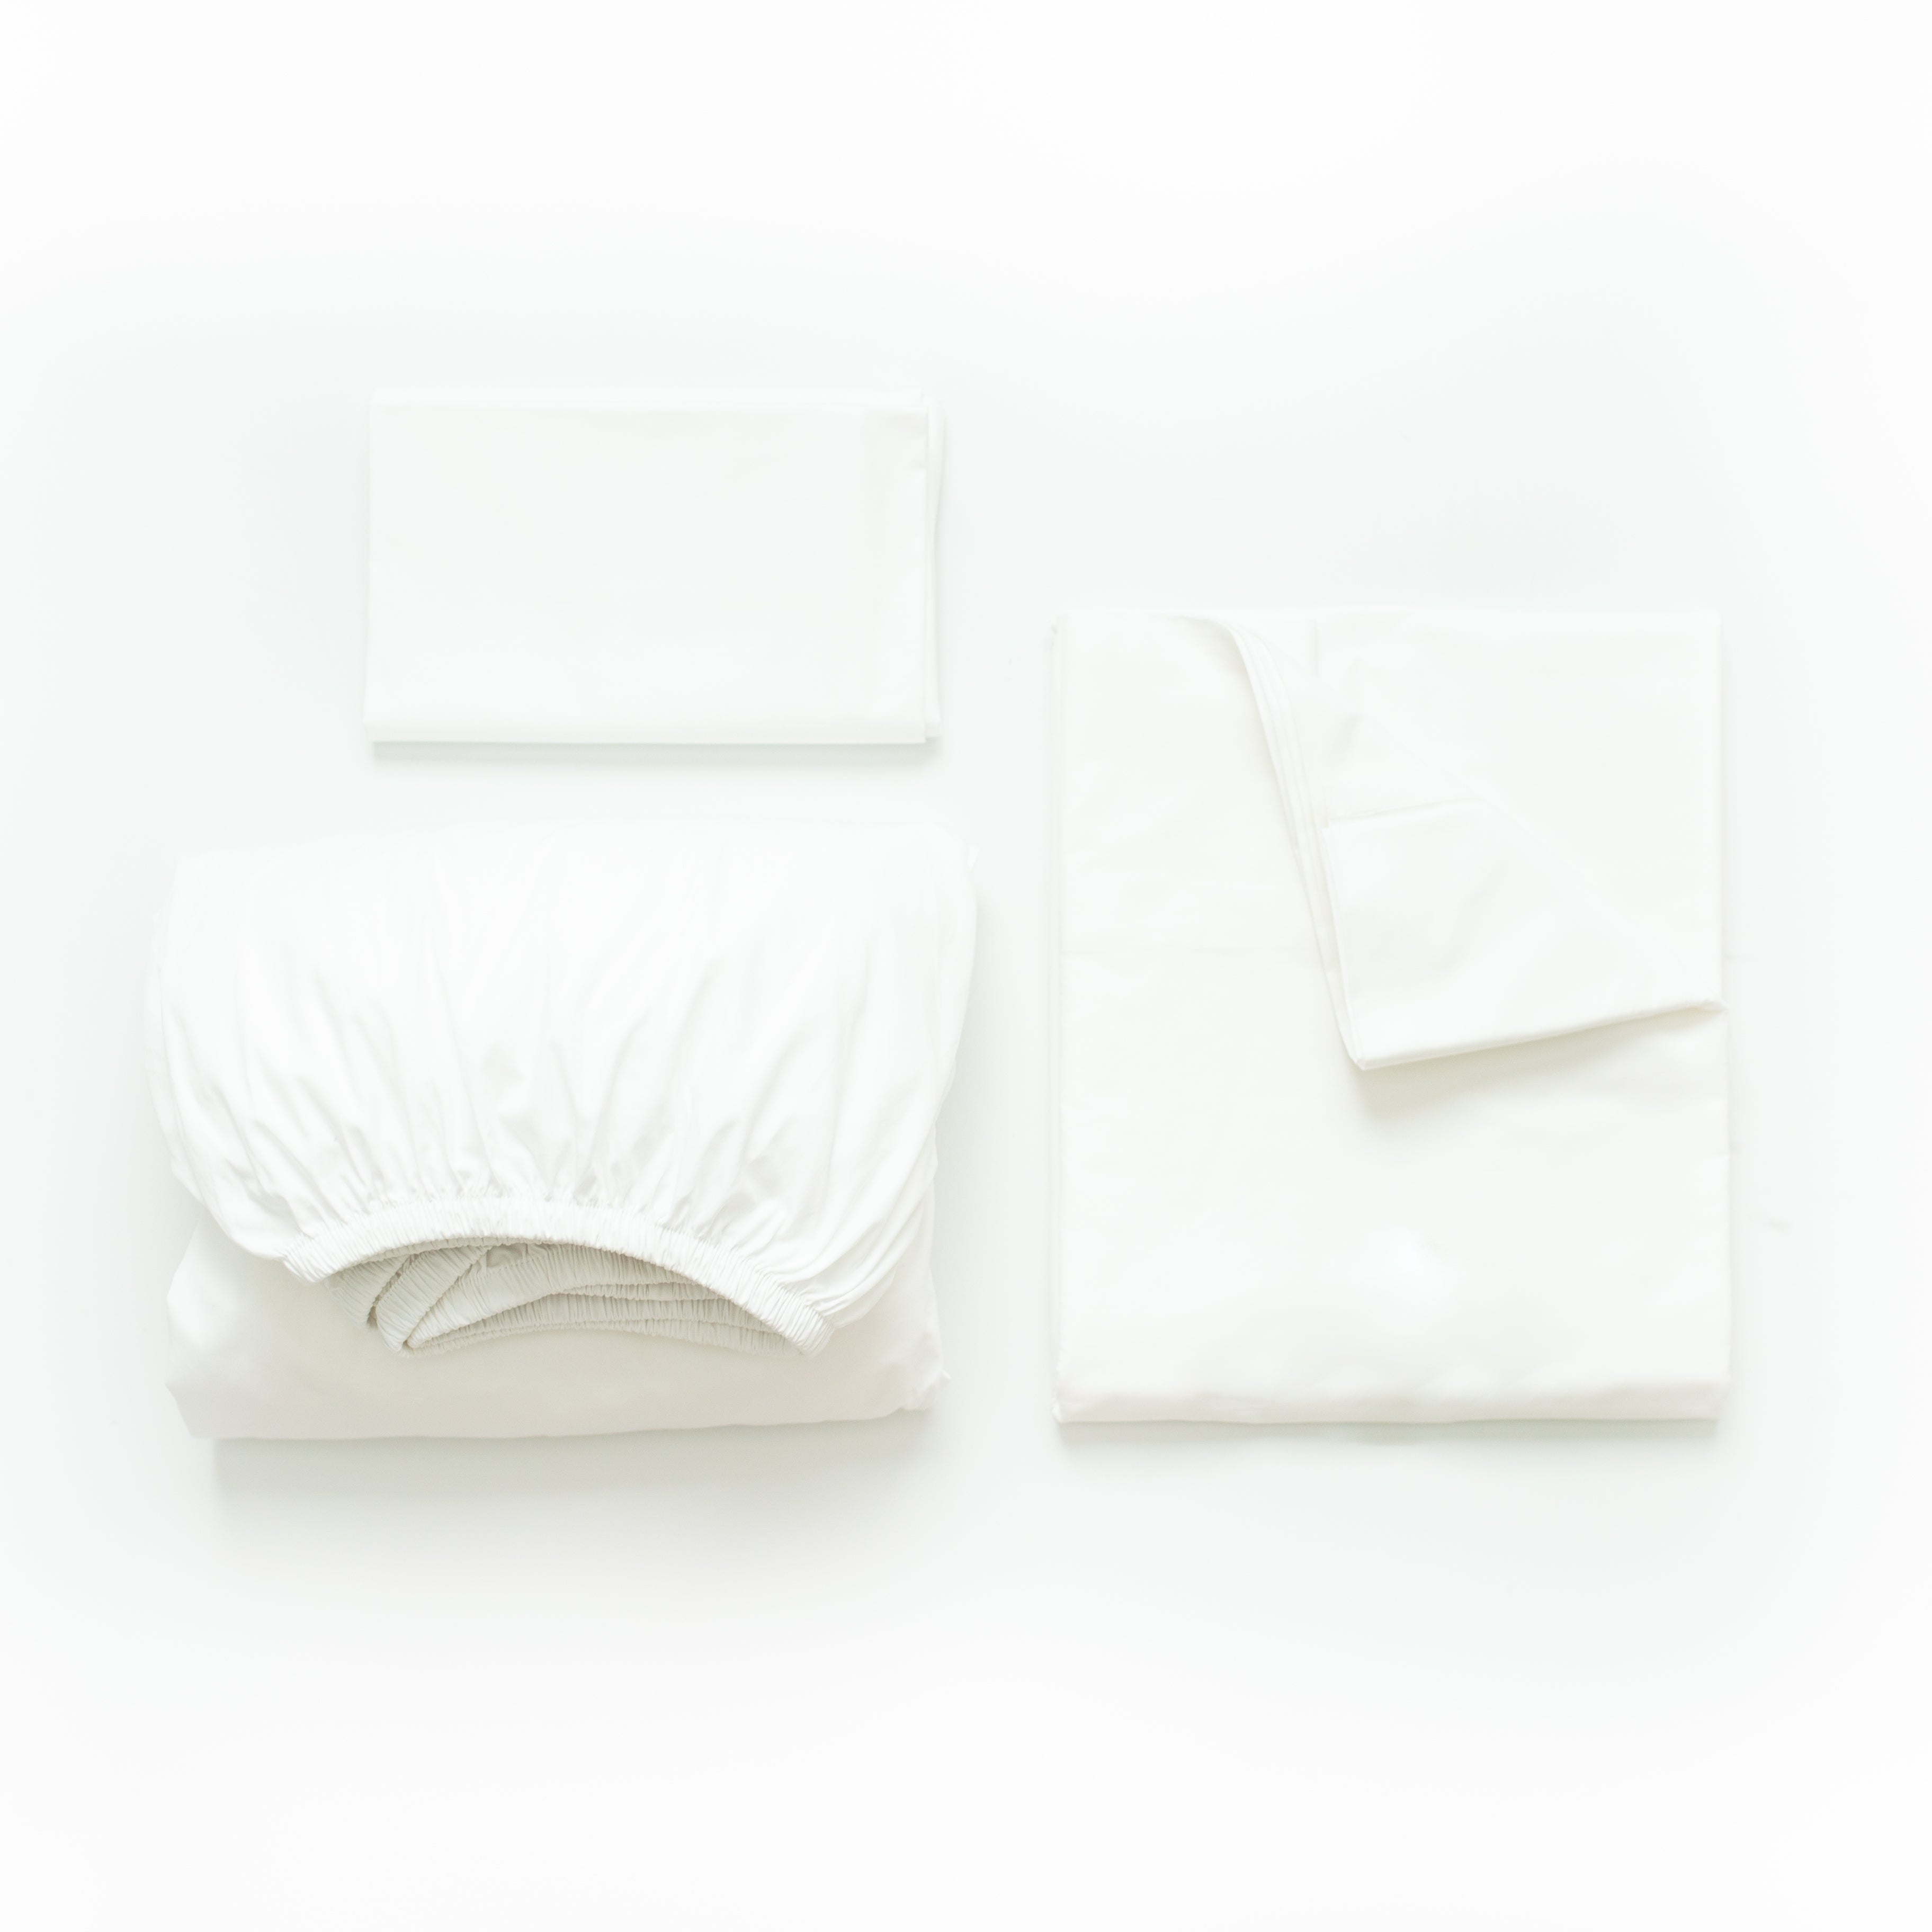 Oolie organic cotton pillowcases, flat sheet, and deep fitted sheet in white cotton, folded flat on a white background.